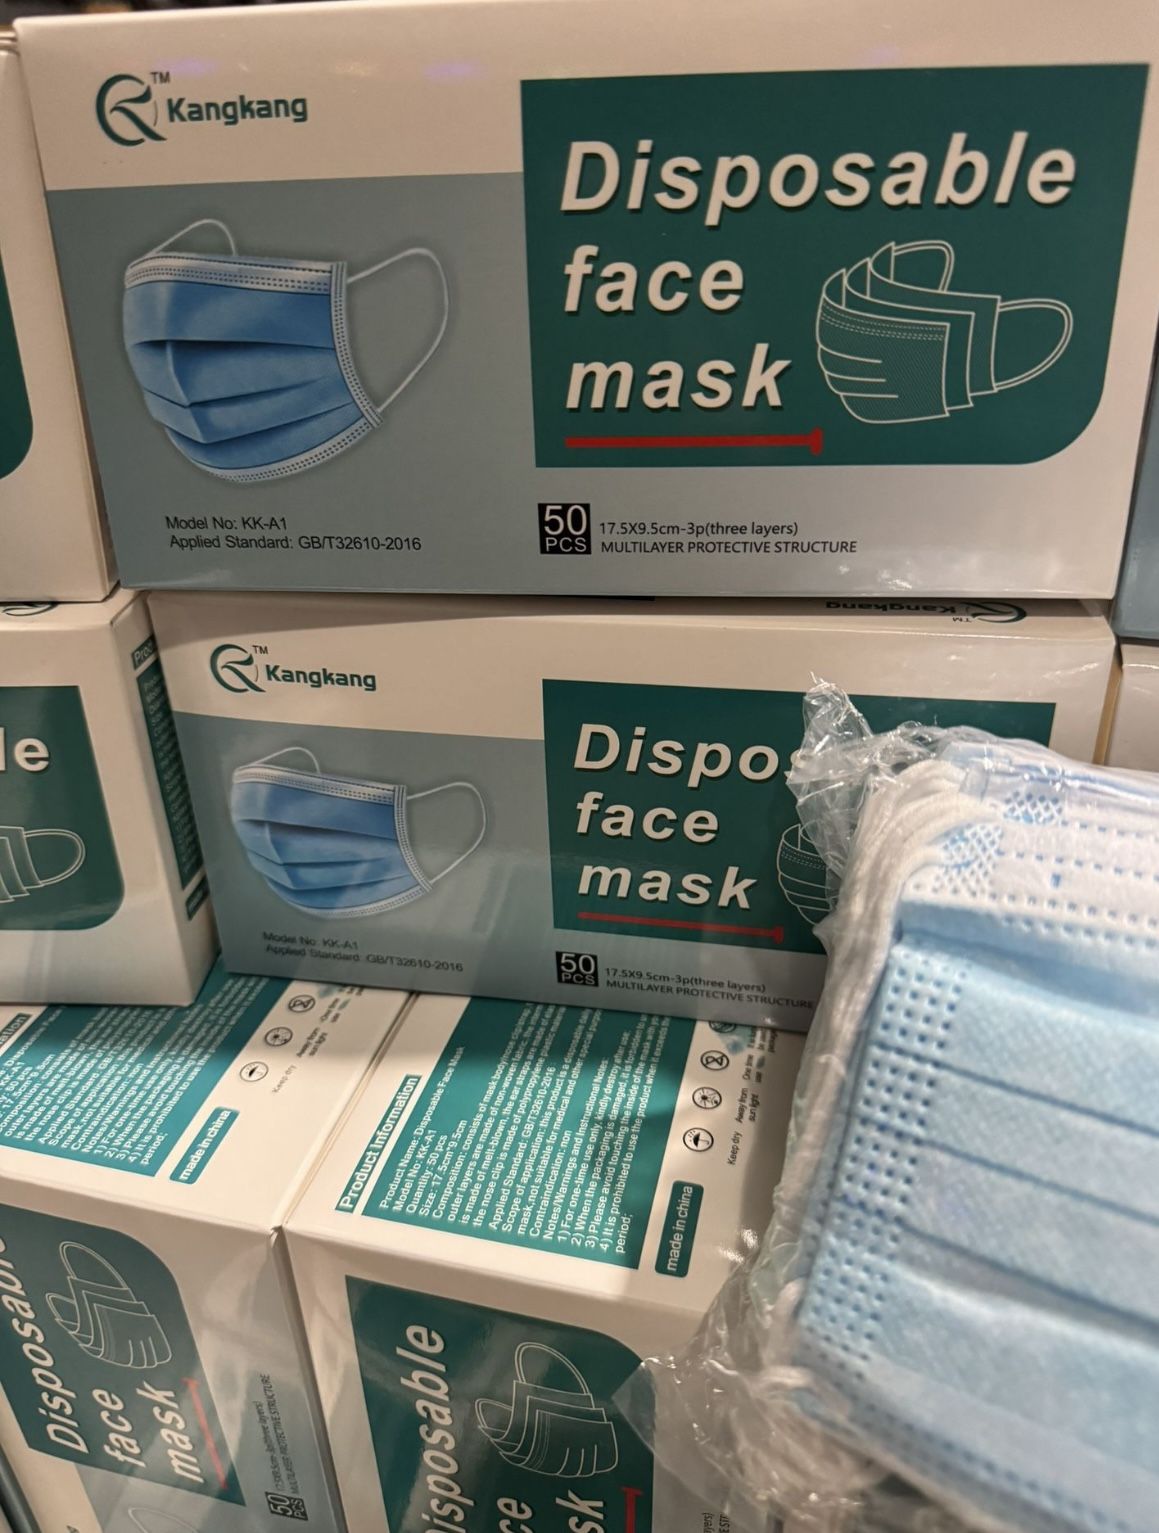 New Face mask By Case So Every Individual Box Of 50pcs Is $0.62